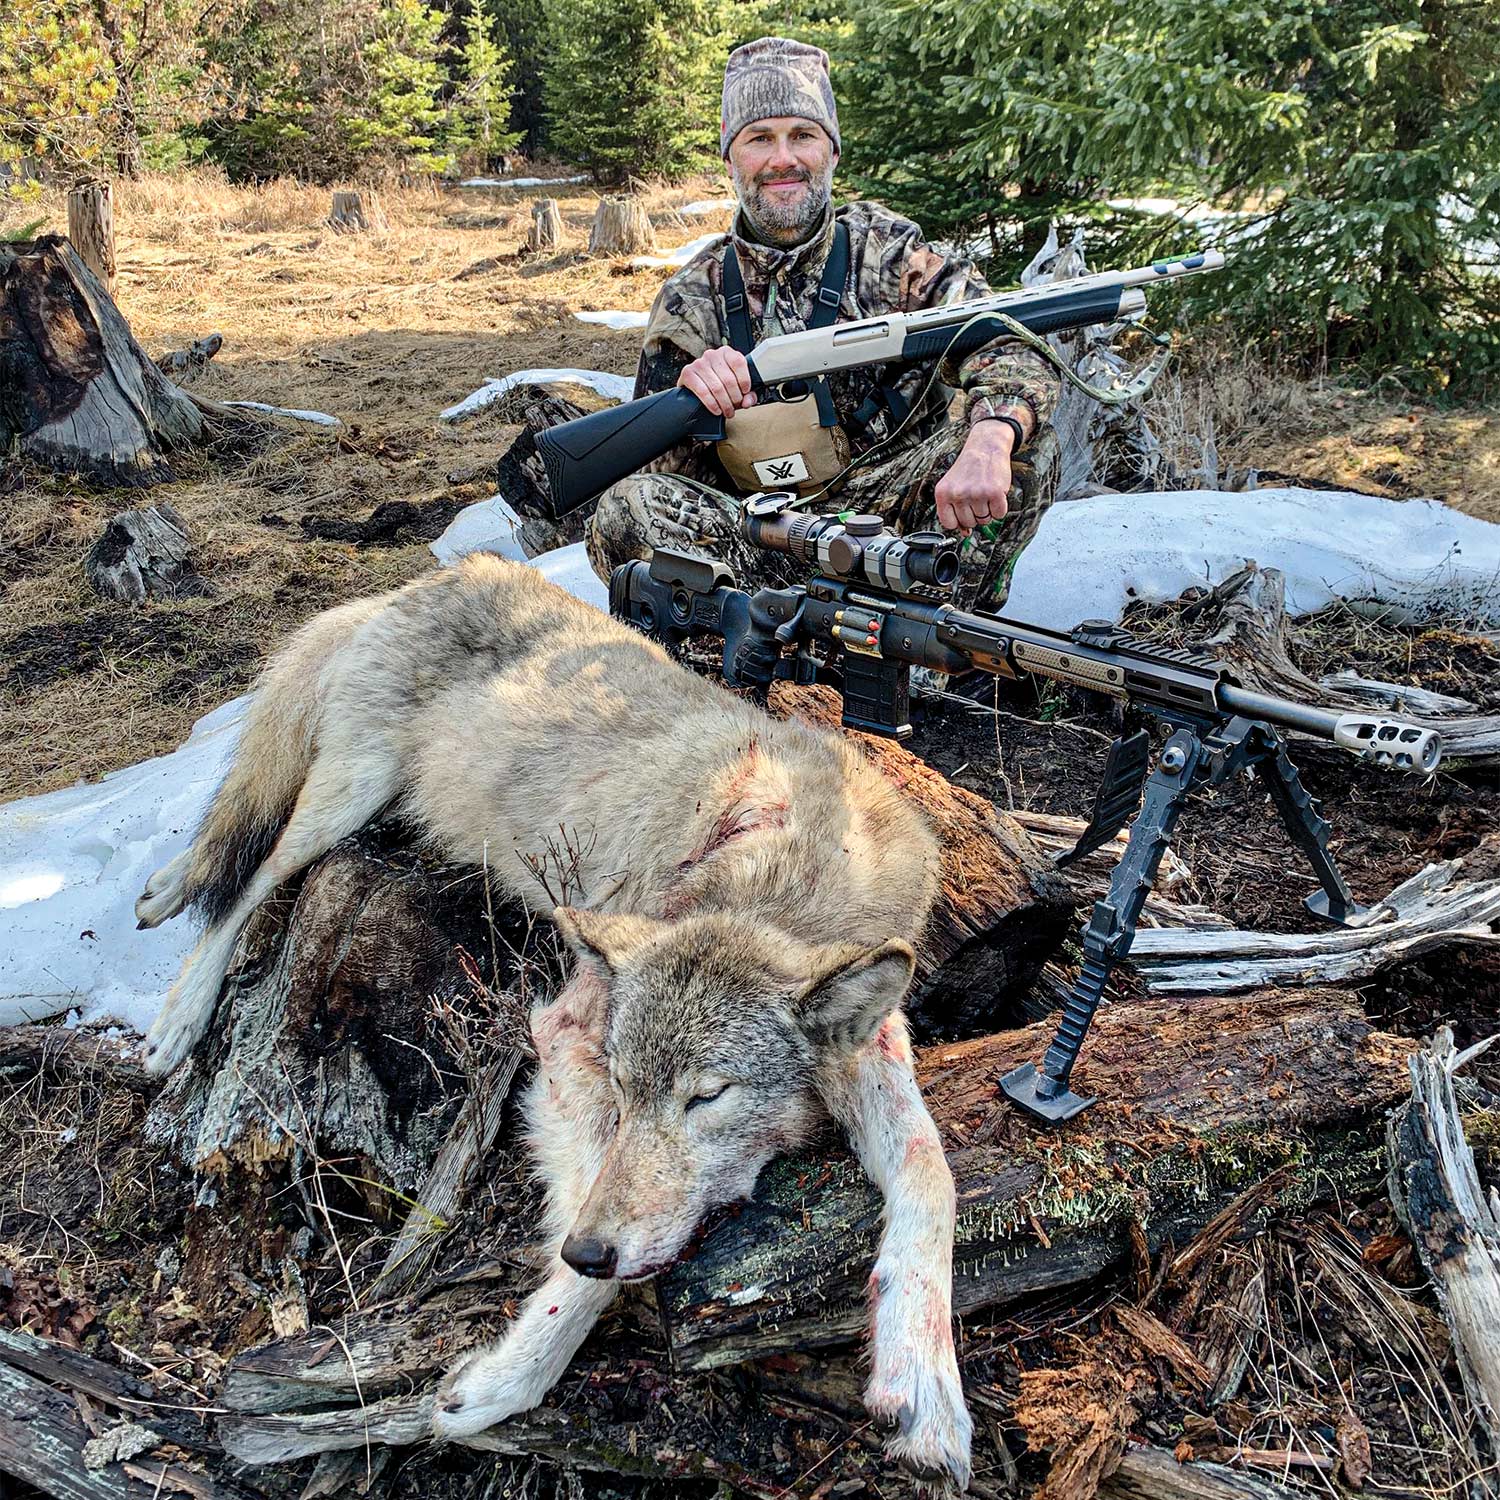 A hunter kneels behind a large wolf next to his hunting rifle.